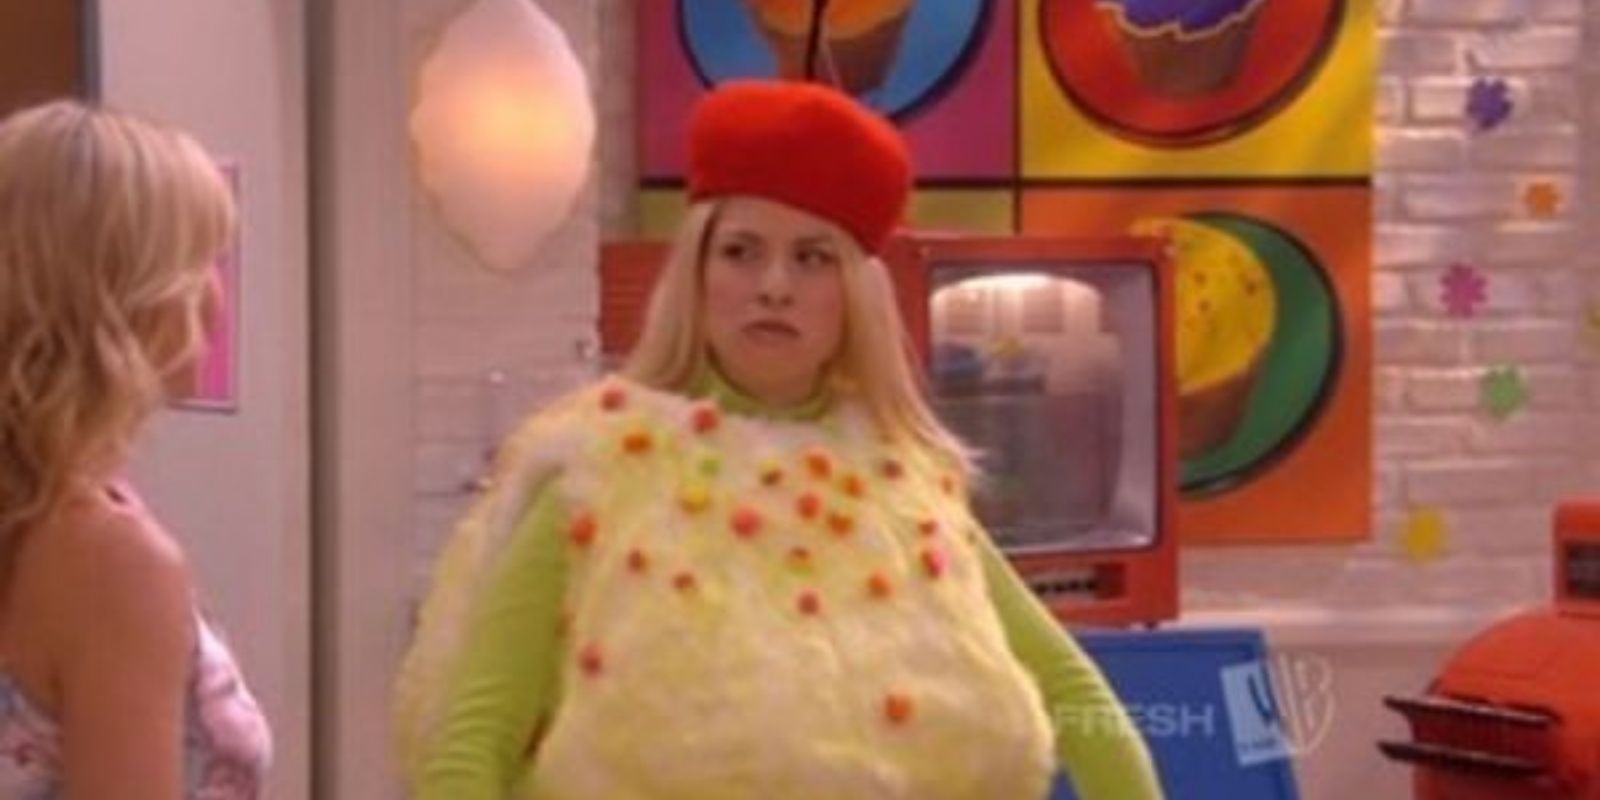 Lauren dressed as a cupcake to promote the bakery in What I Like About You